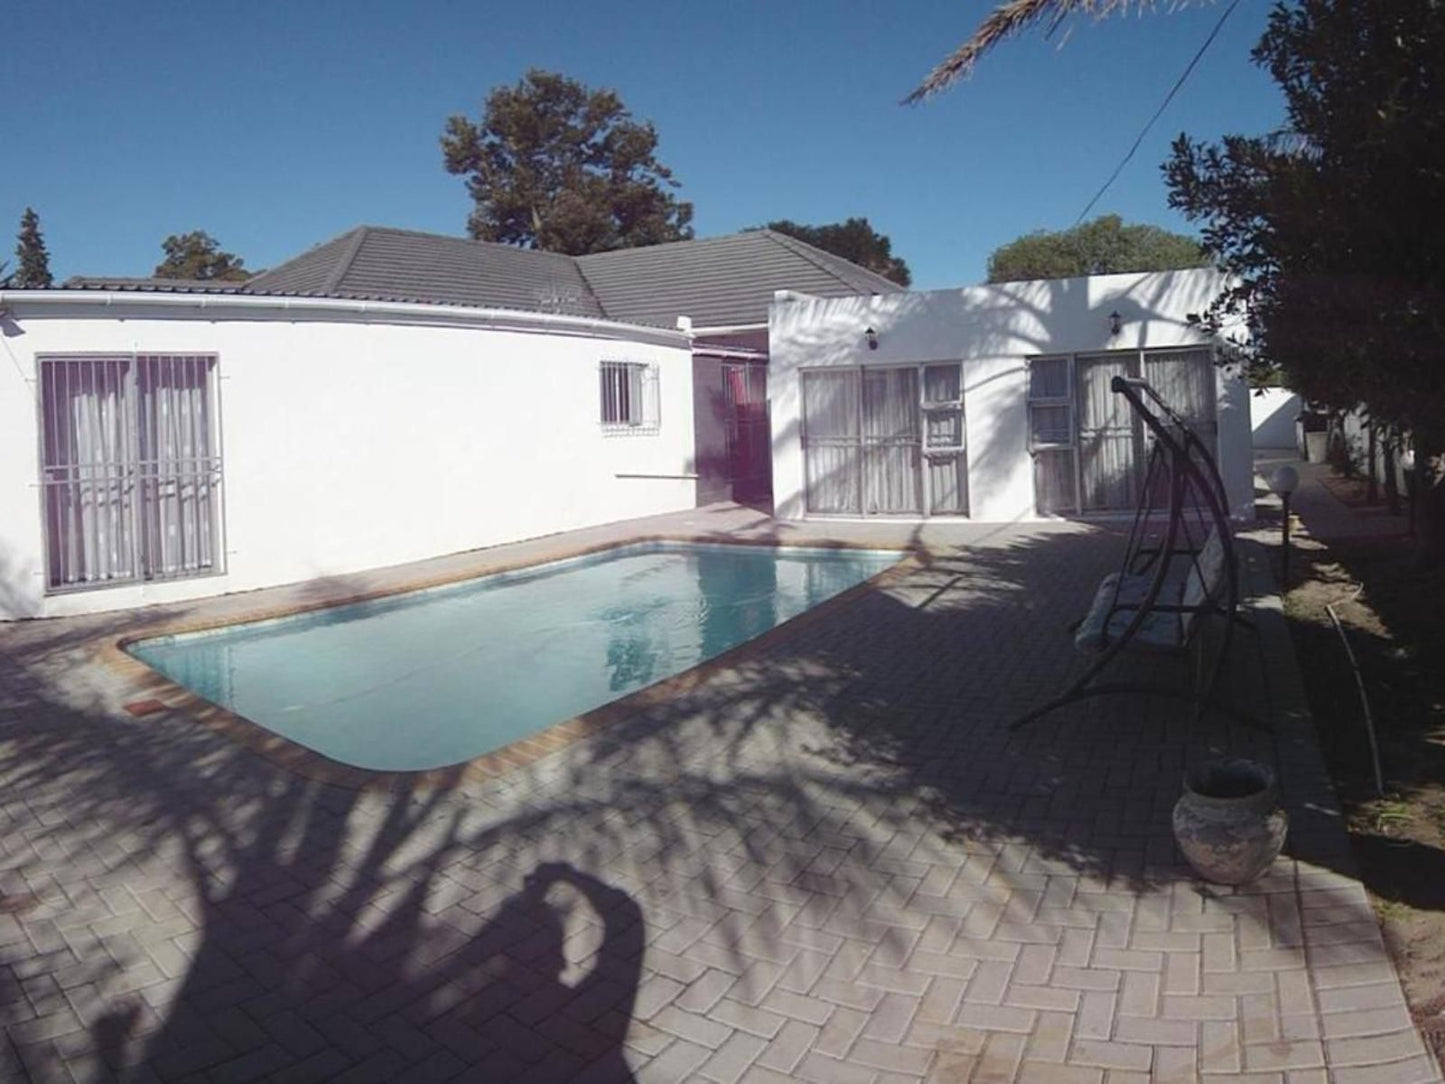 Eaglesnest Bed And Breakfast Kuilsriver Kuils River Cape Town Western Cape South Africa Swimming Pool